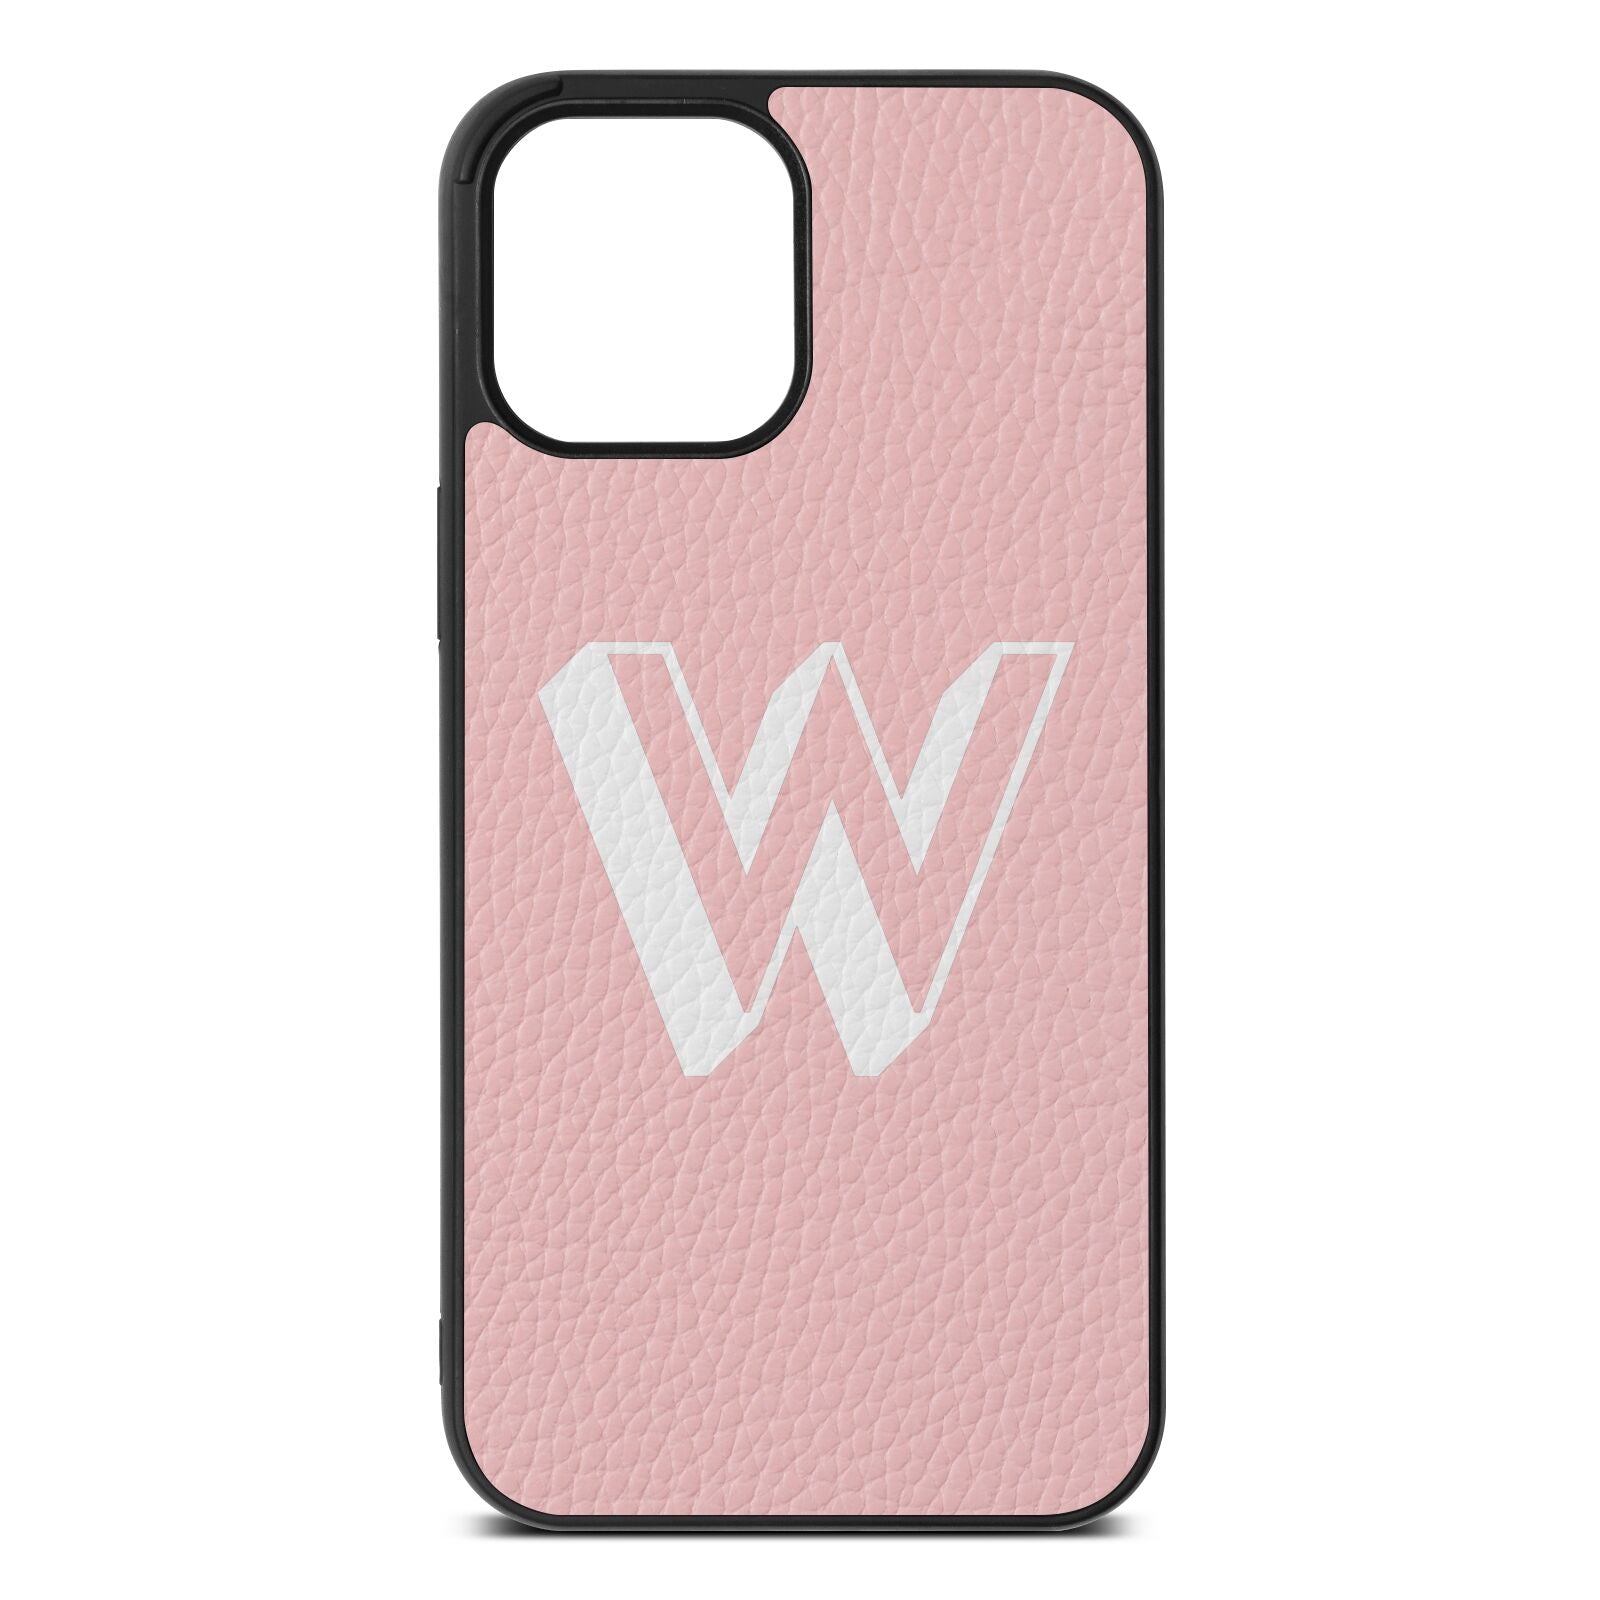 Drop Shadow Initial Pink Pebble Leather iPhone 12 Pro Max Case